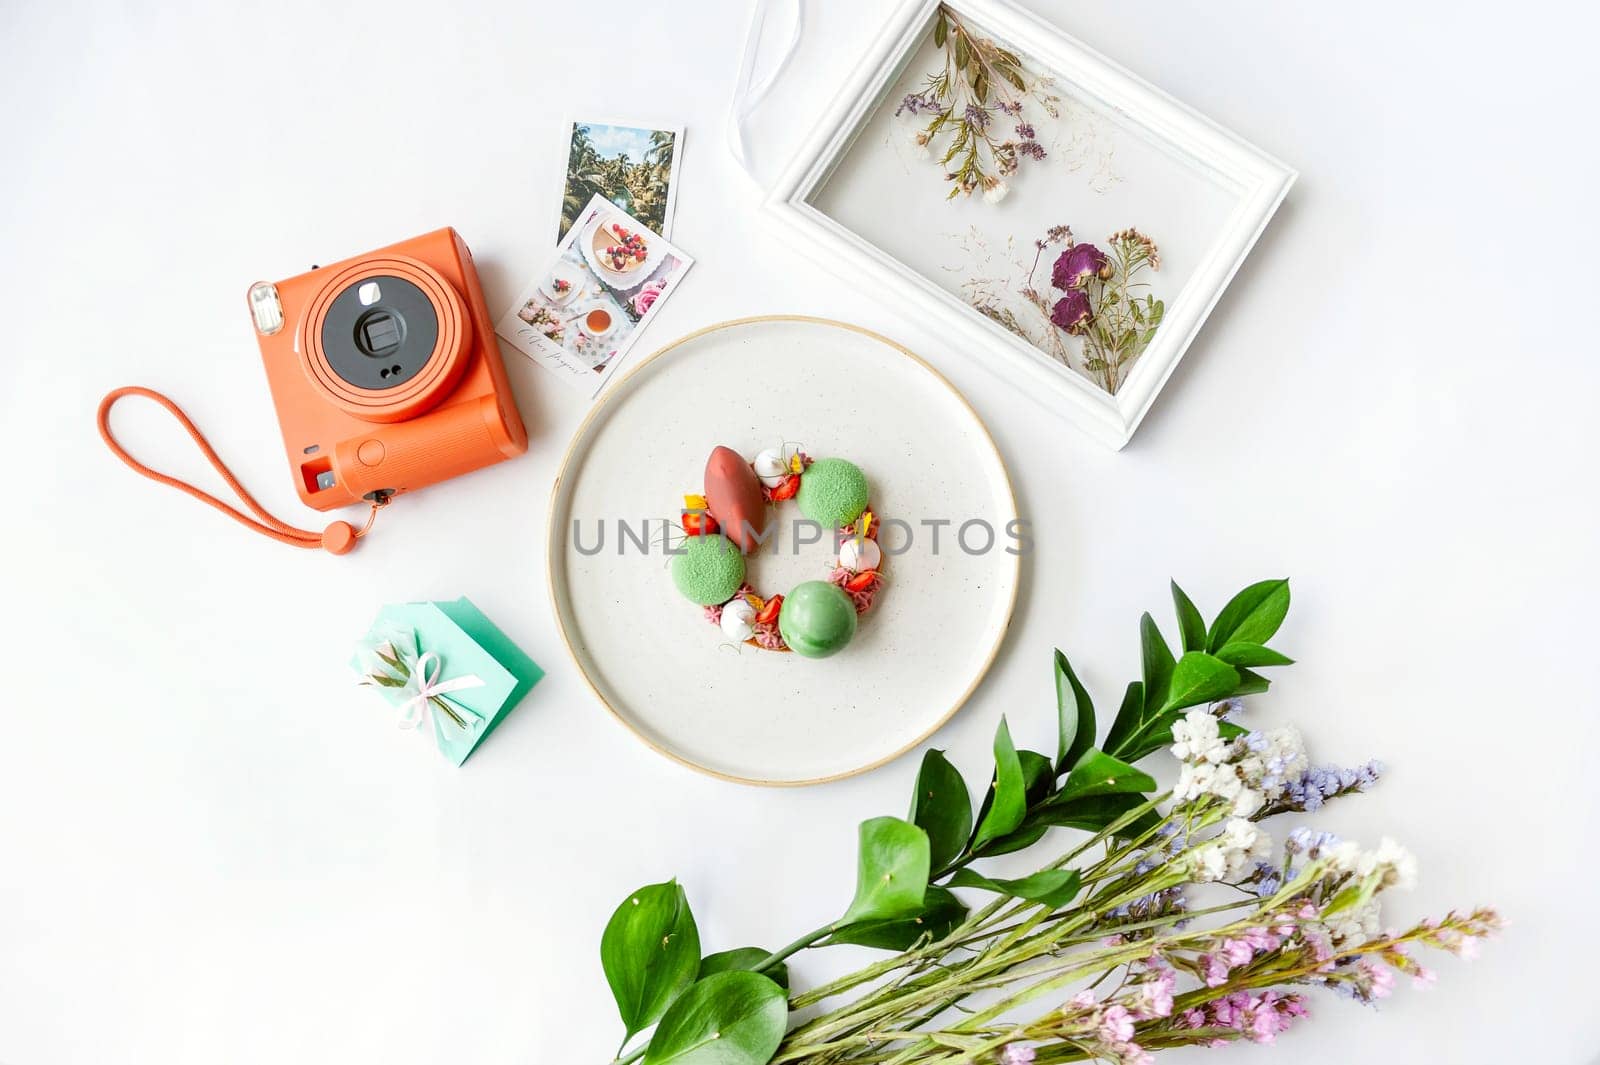 Beautiful background with dessert, polaroid camera and flowers. Top view on white table